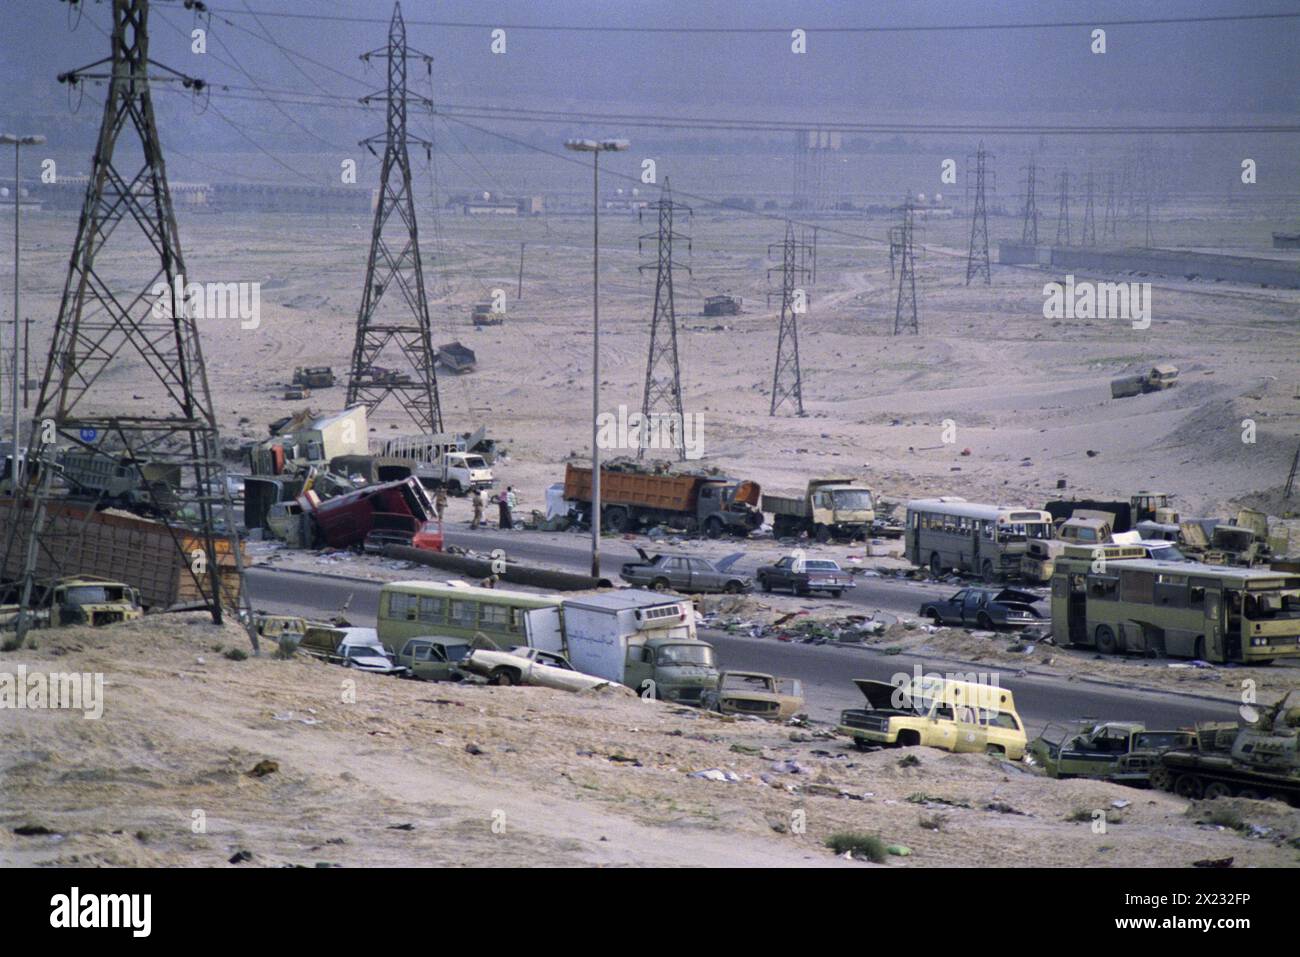 1st April 1991 Wrecked Iraqi Army vehicles along the “Highway of Death” on the road to Basra, west of Kuwait City. Stock Photo